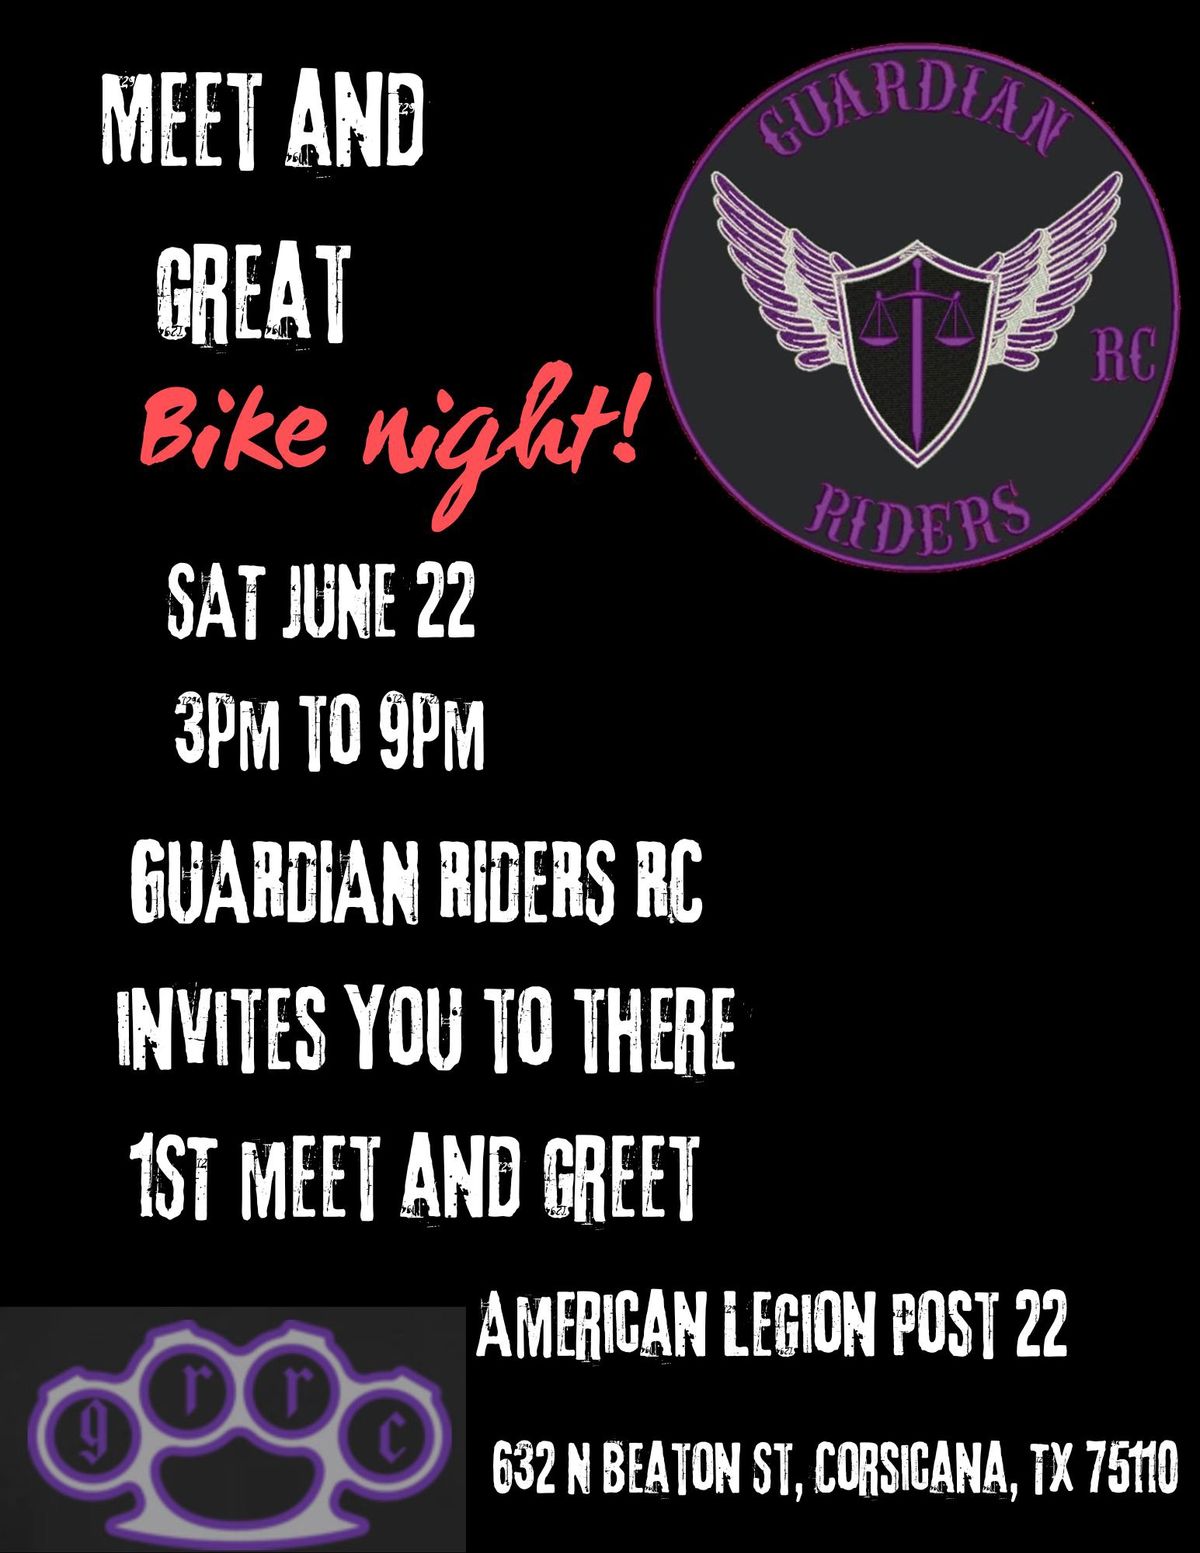 Guardian riders RC meet and greet